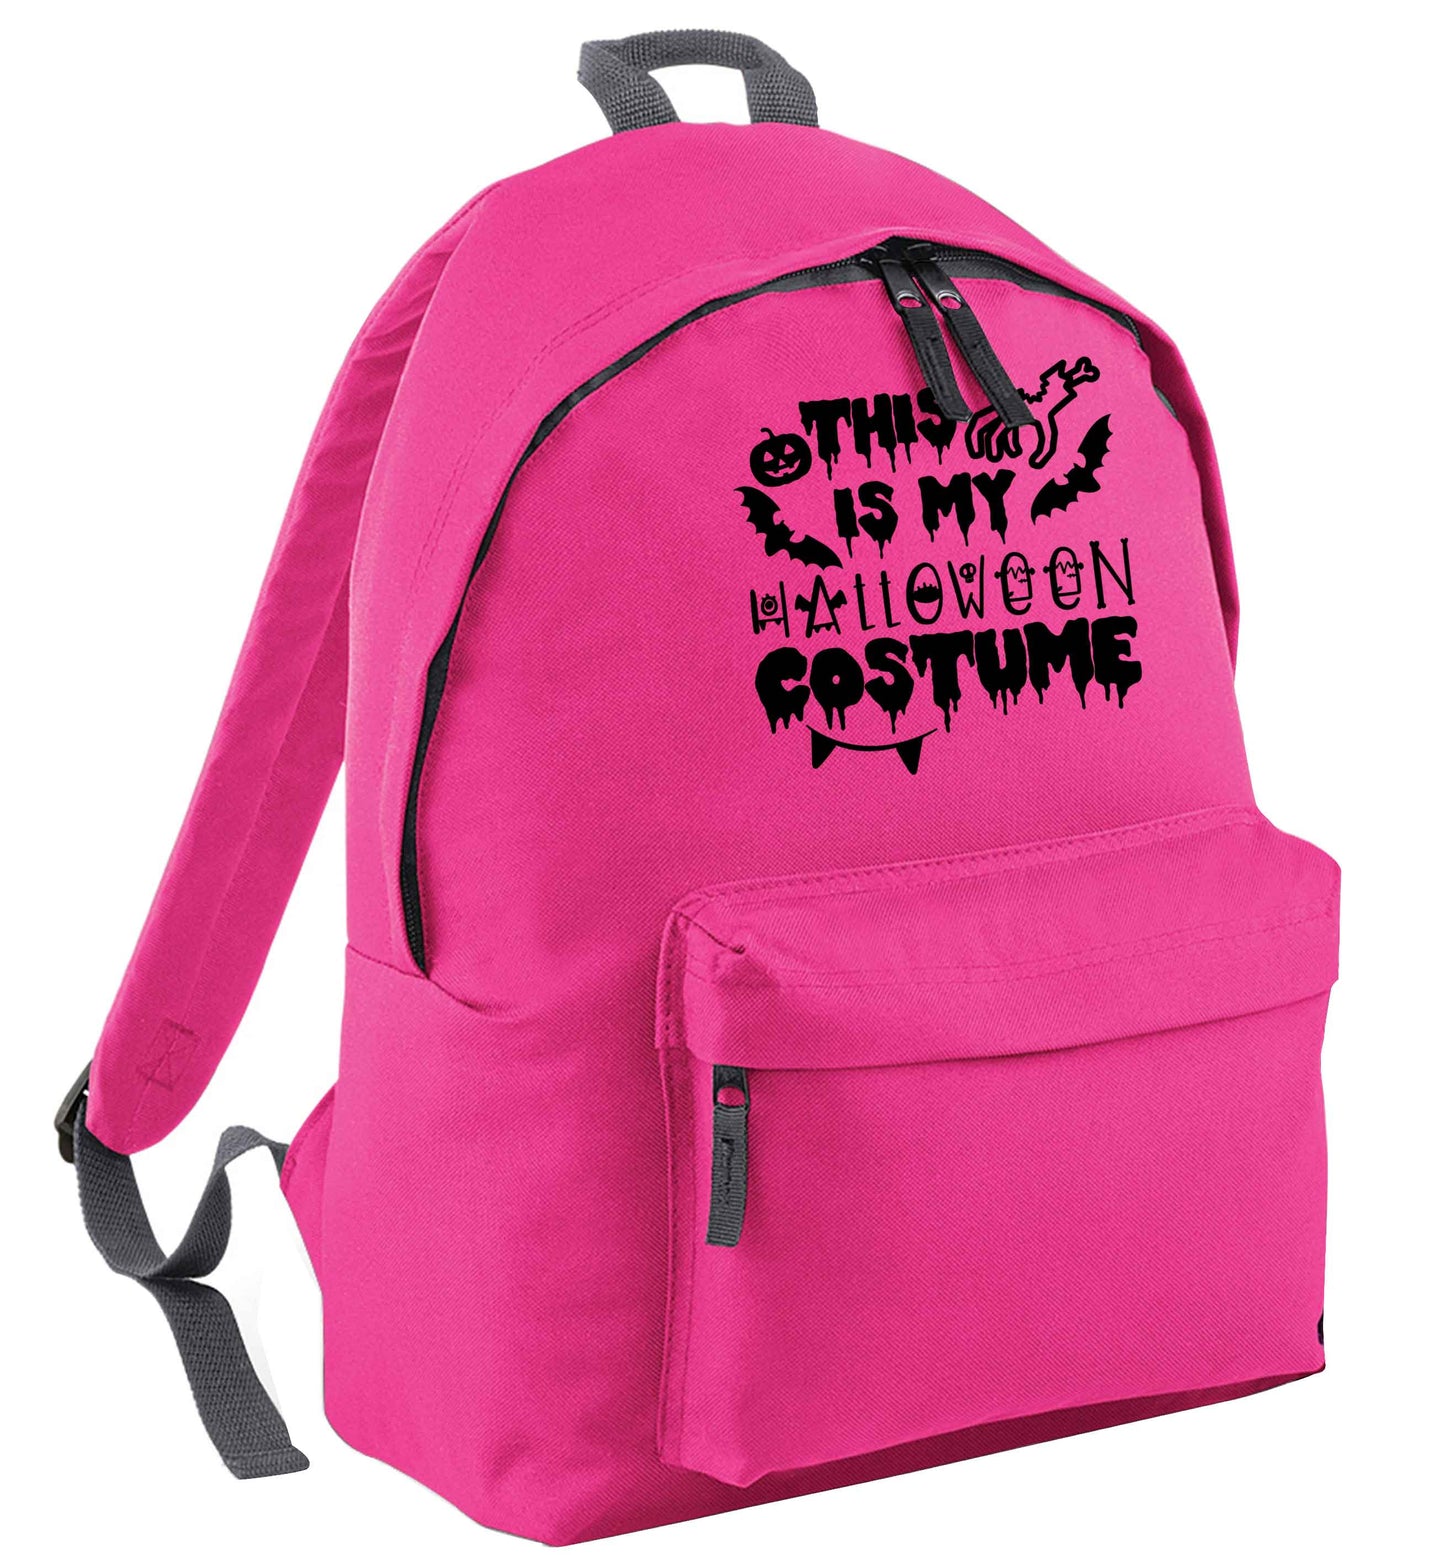 This is my halloween costume | Children's backpack